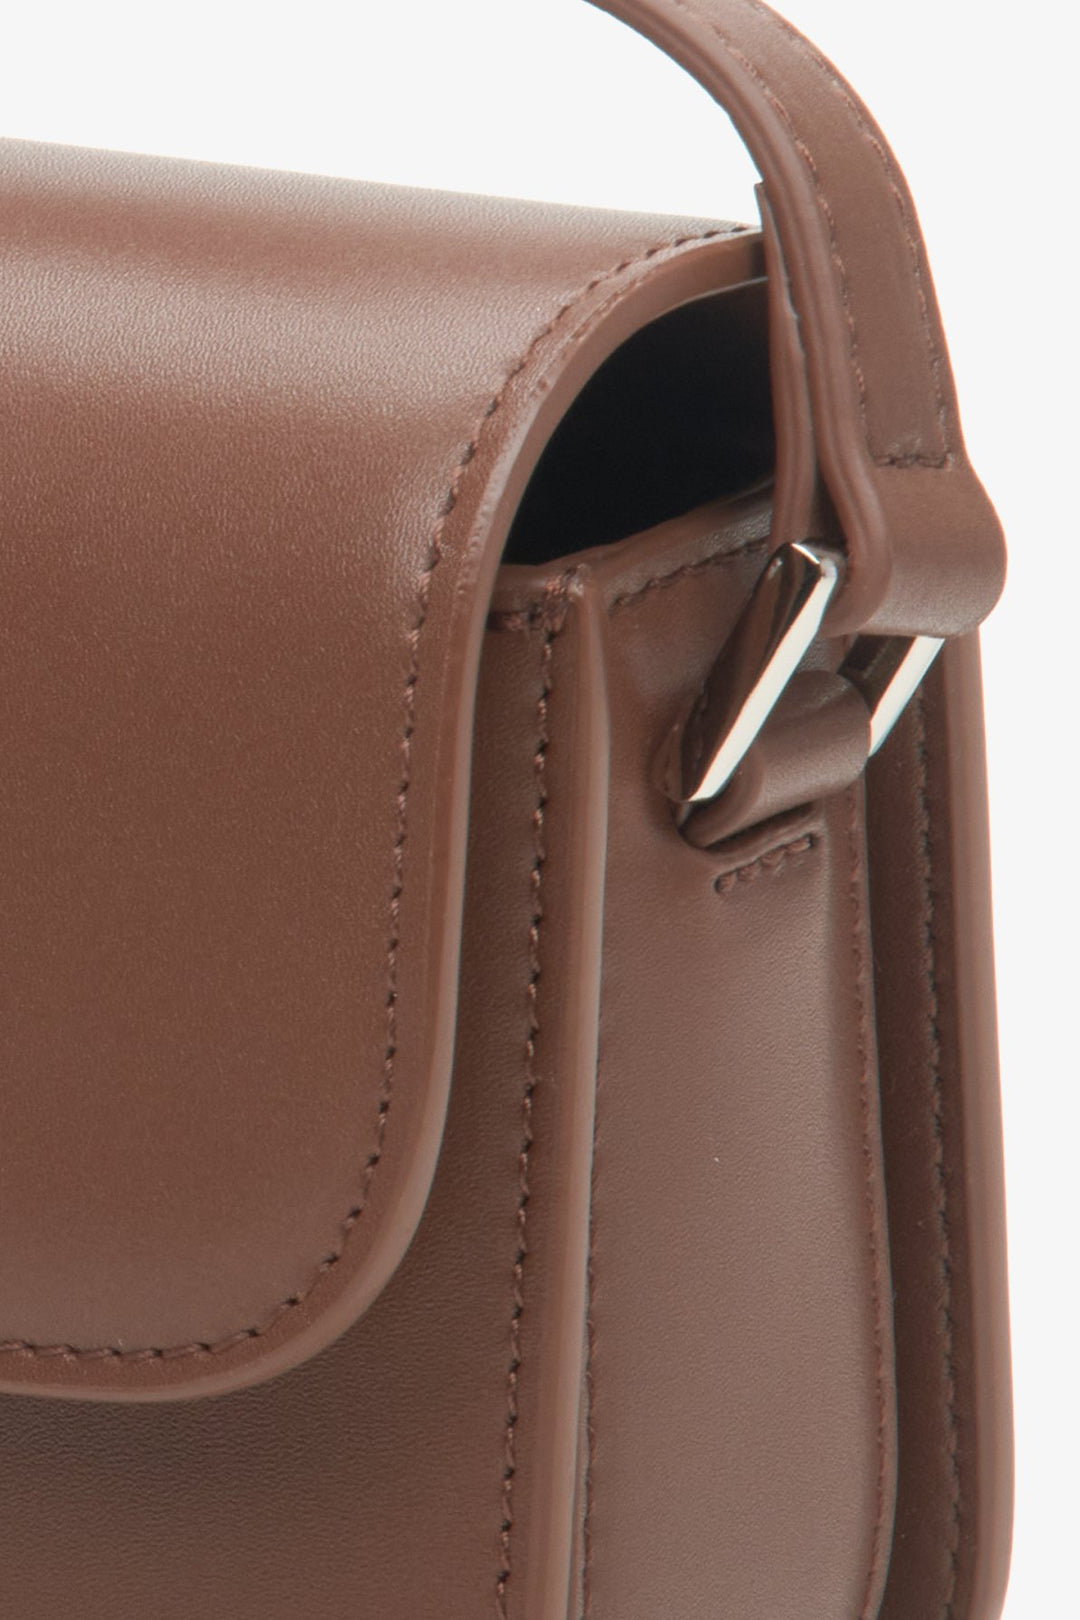 Women's handbag in brown genuine leather - close-up on details.